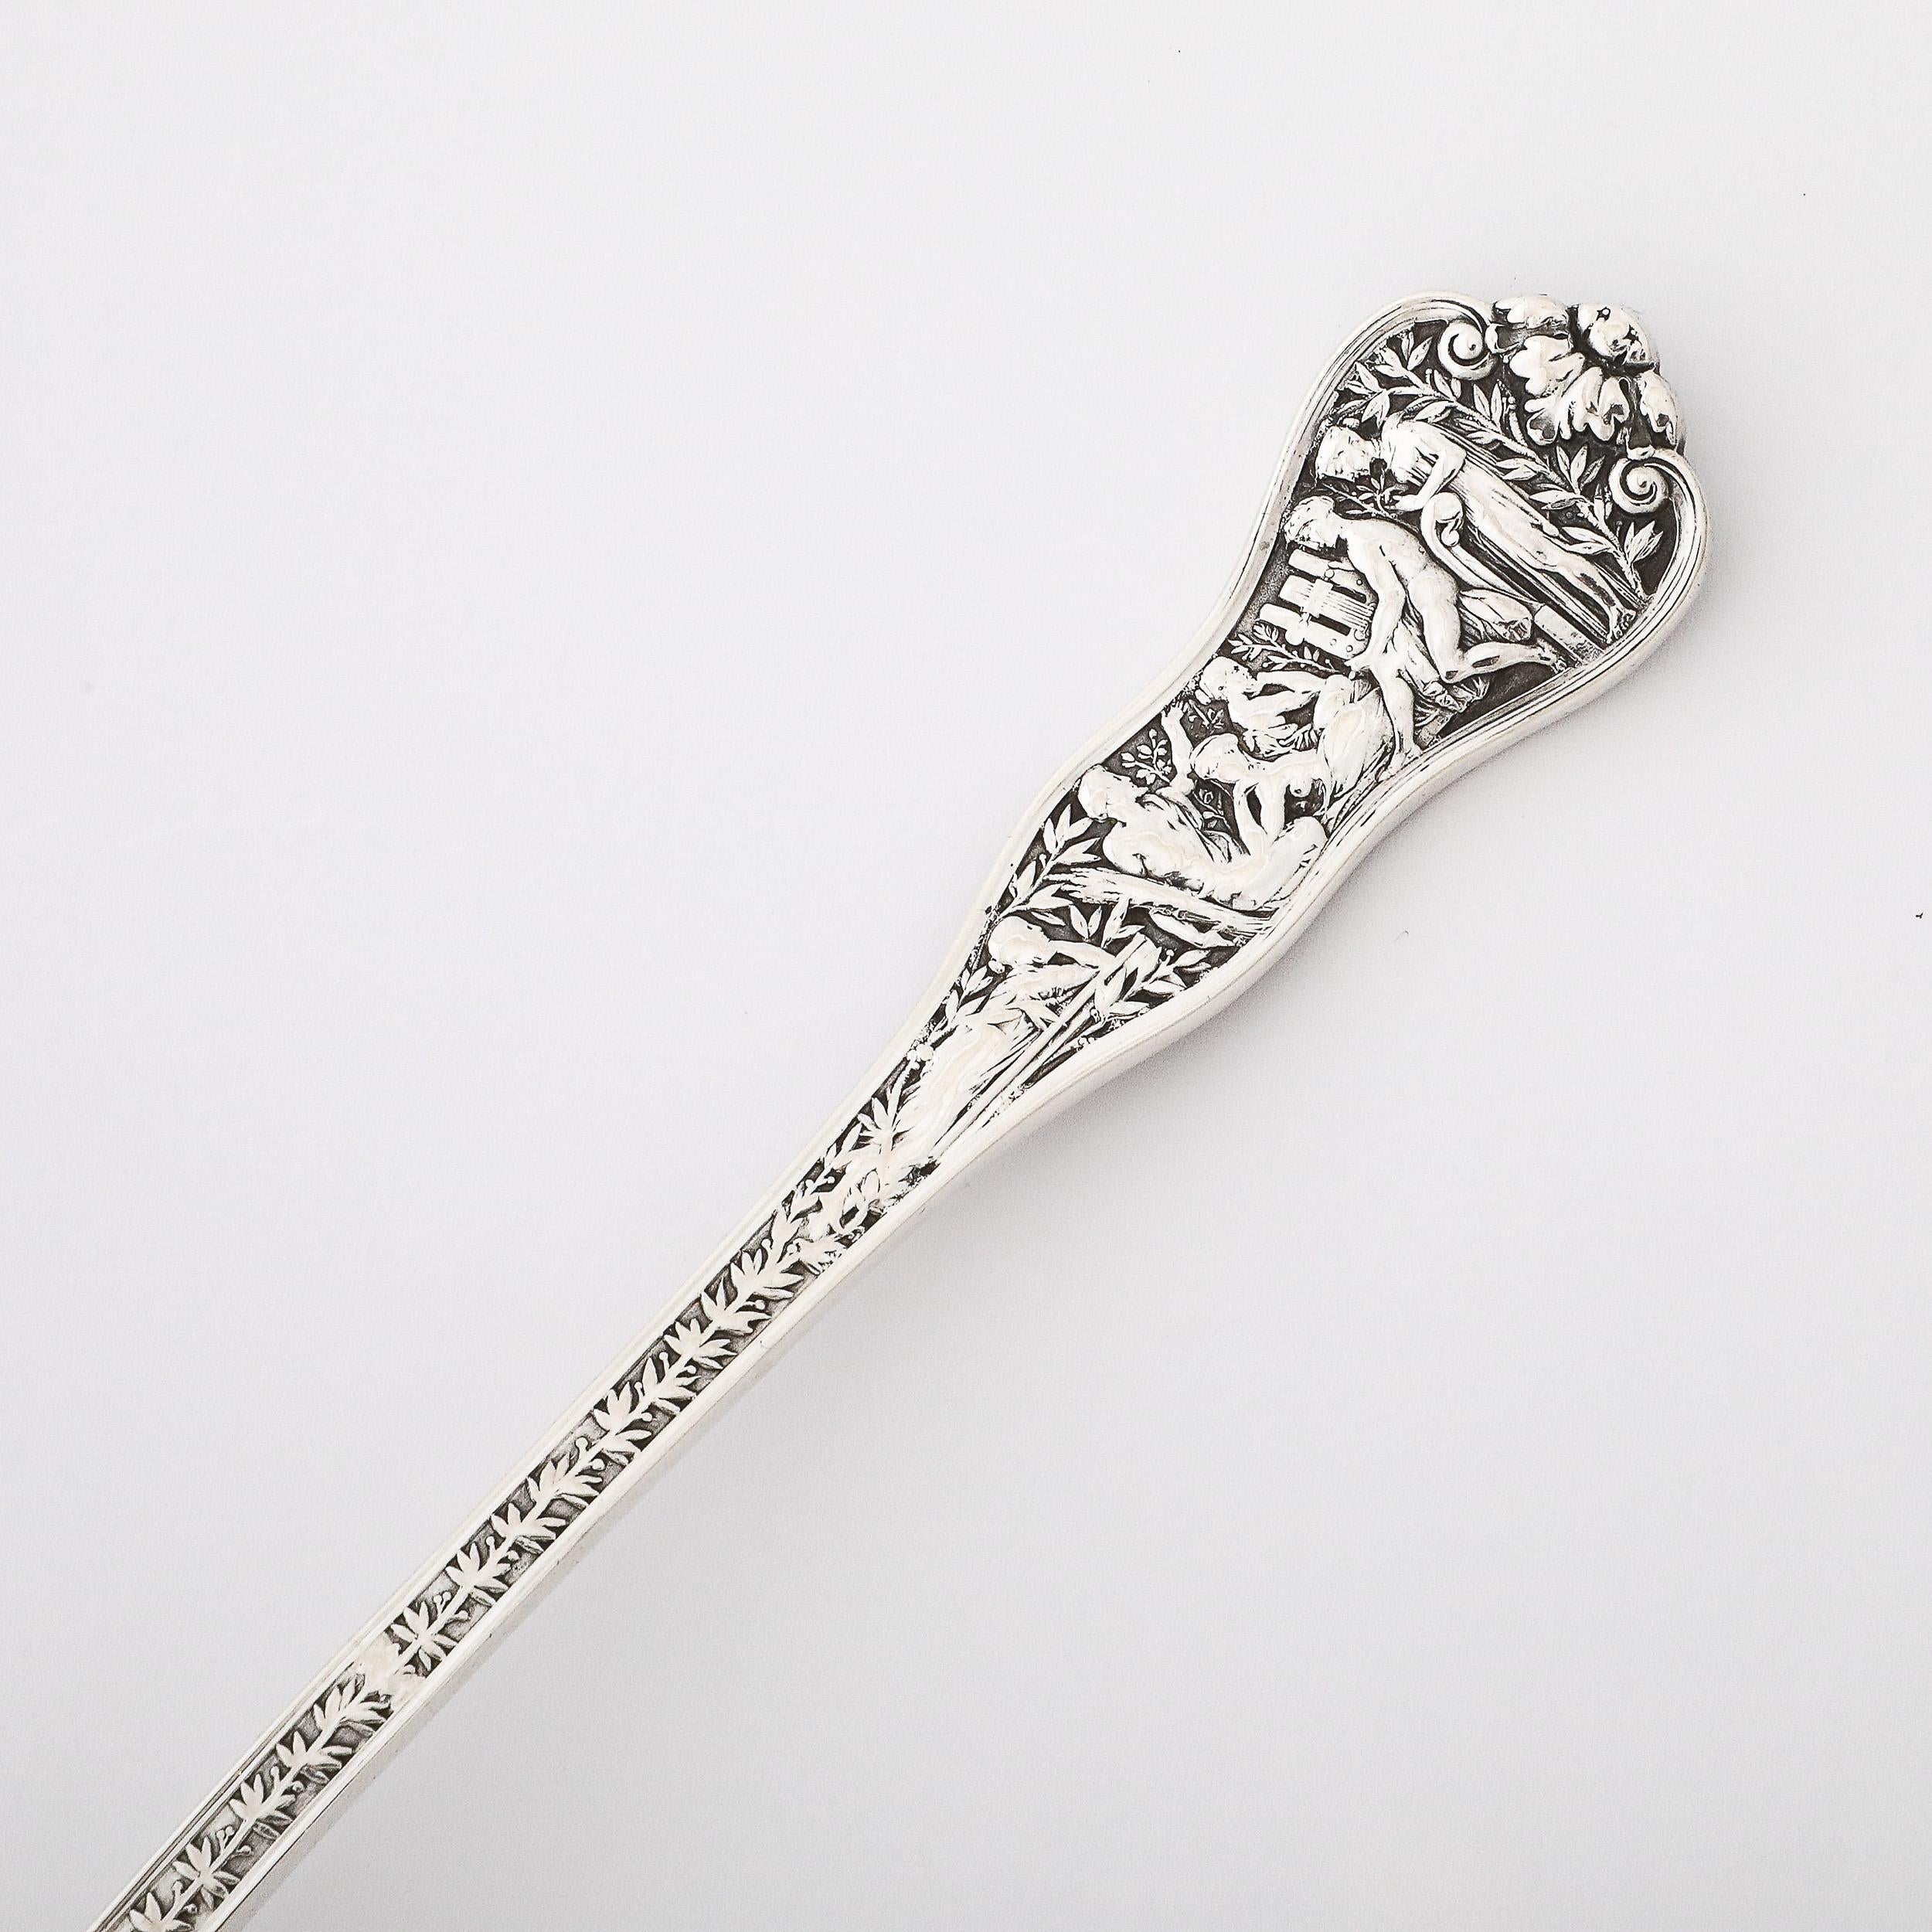 This rare and stunning Tiffany and Co. 19th Century Sterling Silver and Gold Washed Serving Spoon in Olympian Pattern originates from the United States in 1878. Features a gold washed rounded rectangular scoop, with an illustrious and highly